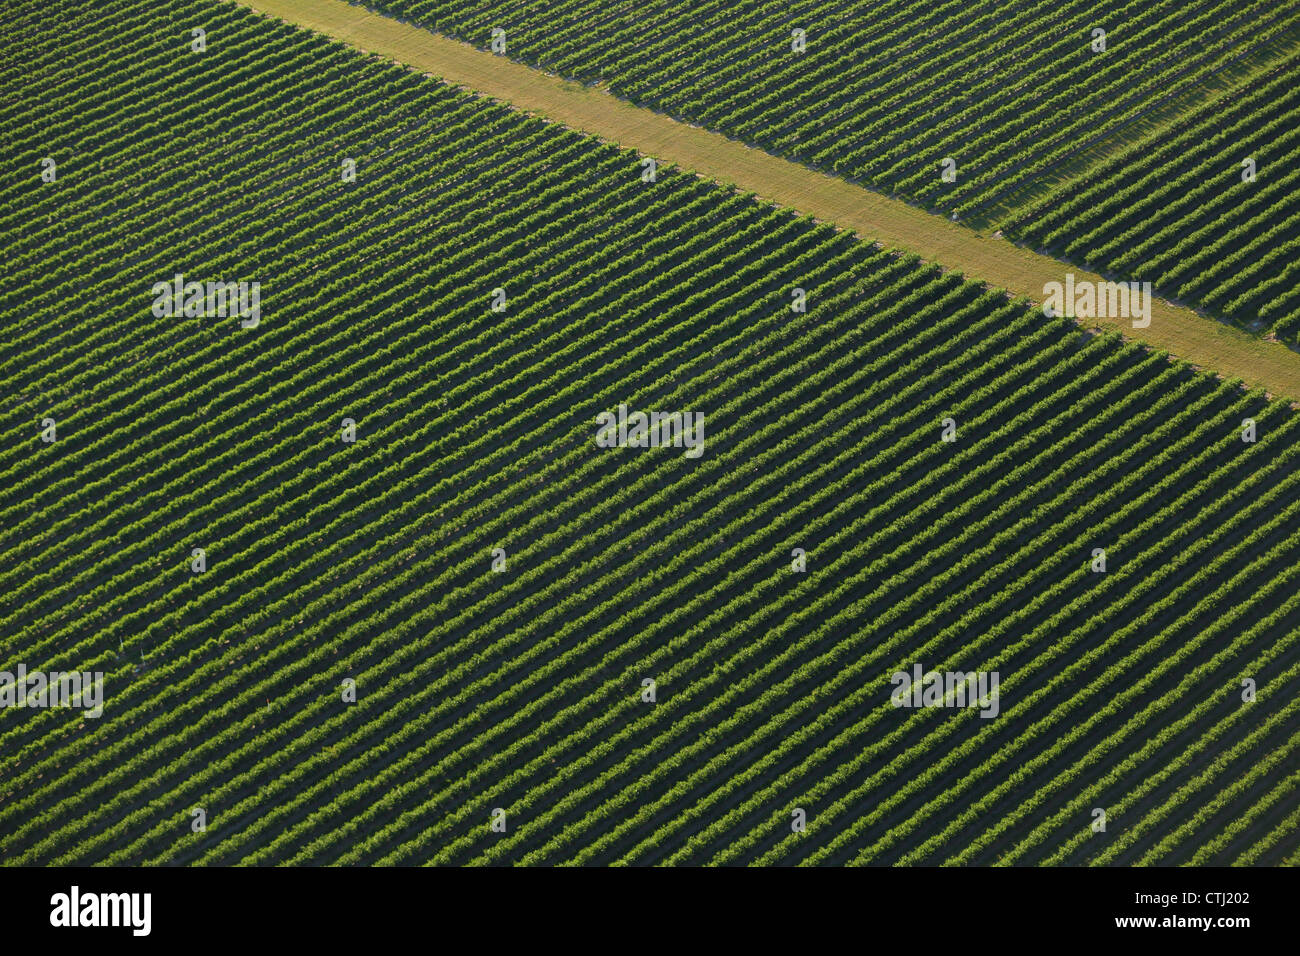 Aerial view of vineyard, McMinnville, Oregon Stock Photo